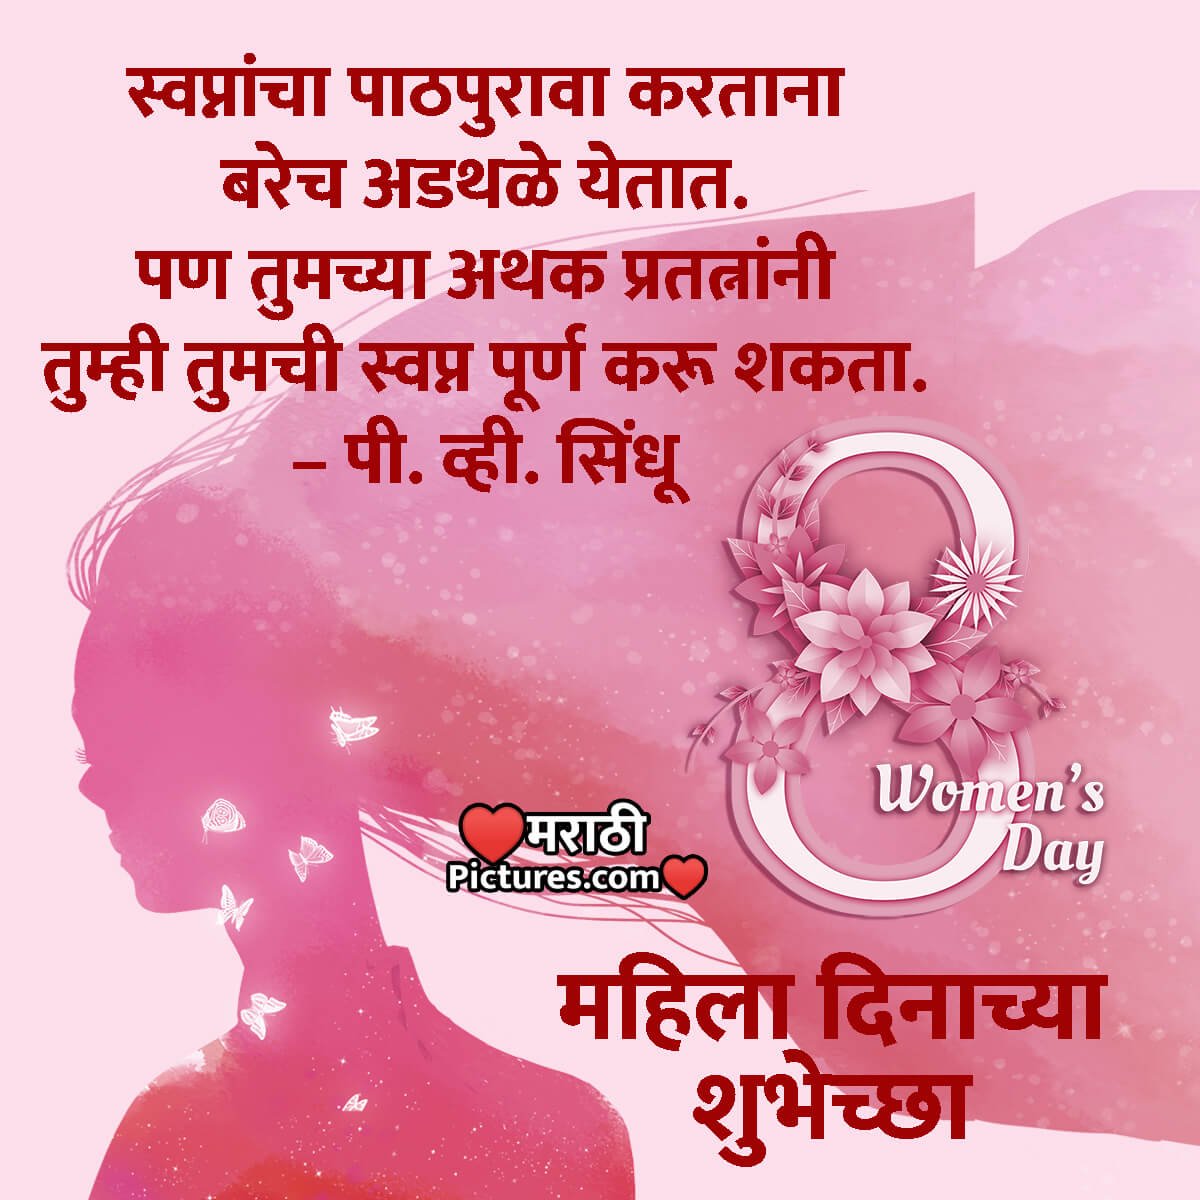 Inspirational Women’s Day Quotes In Marathi